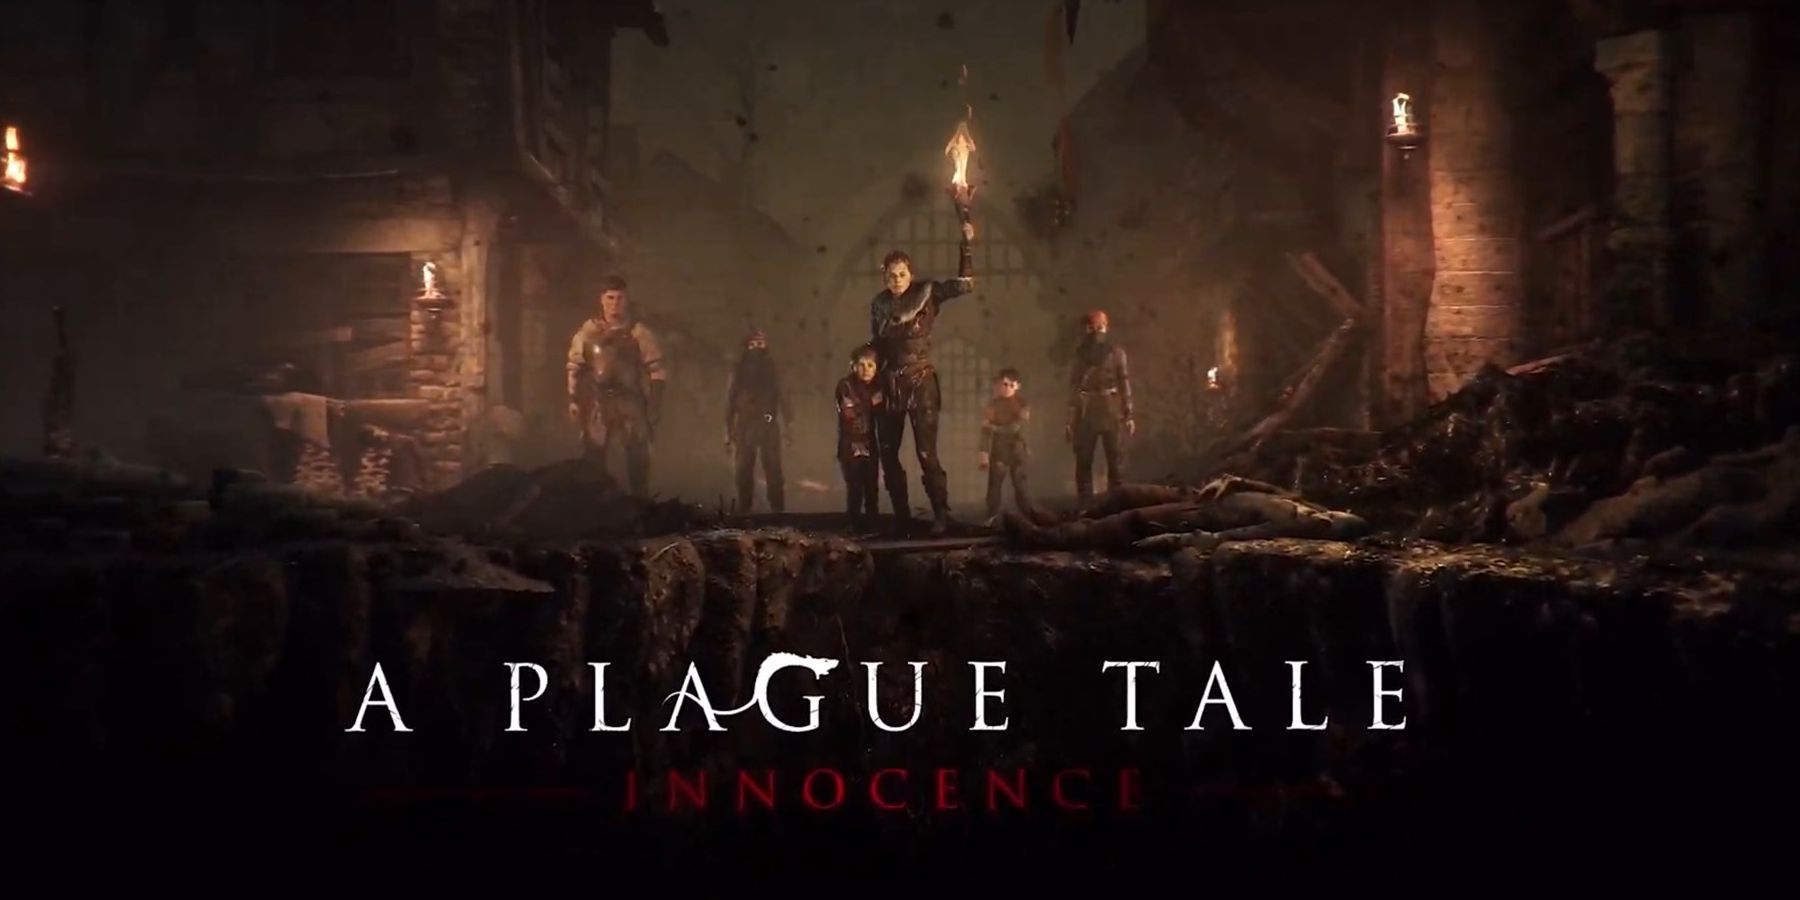 Xbox Game Pass Subscribers Should Play A Plague Tale While They